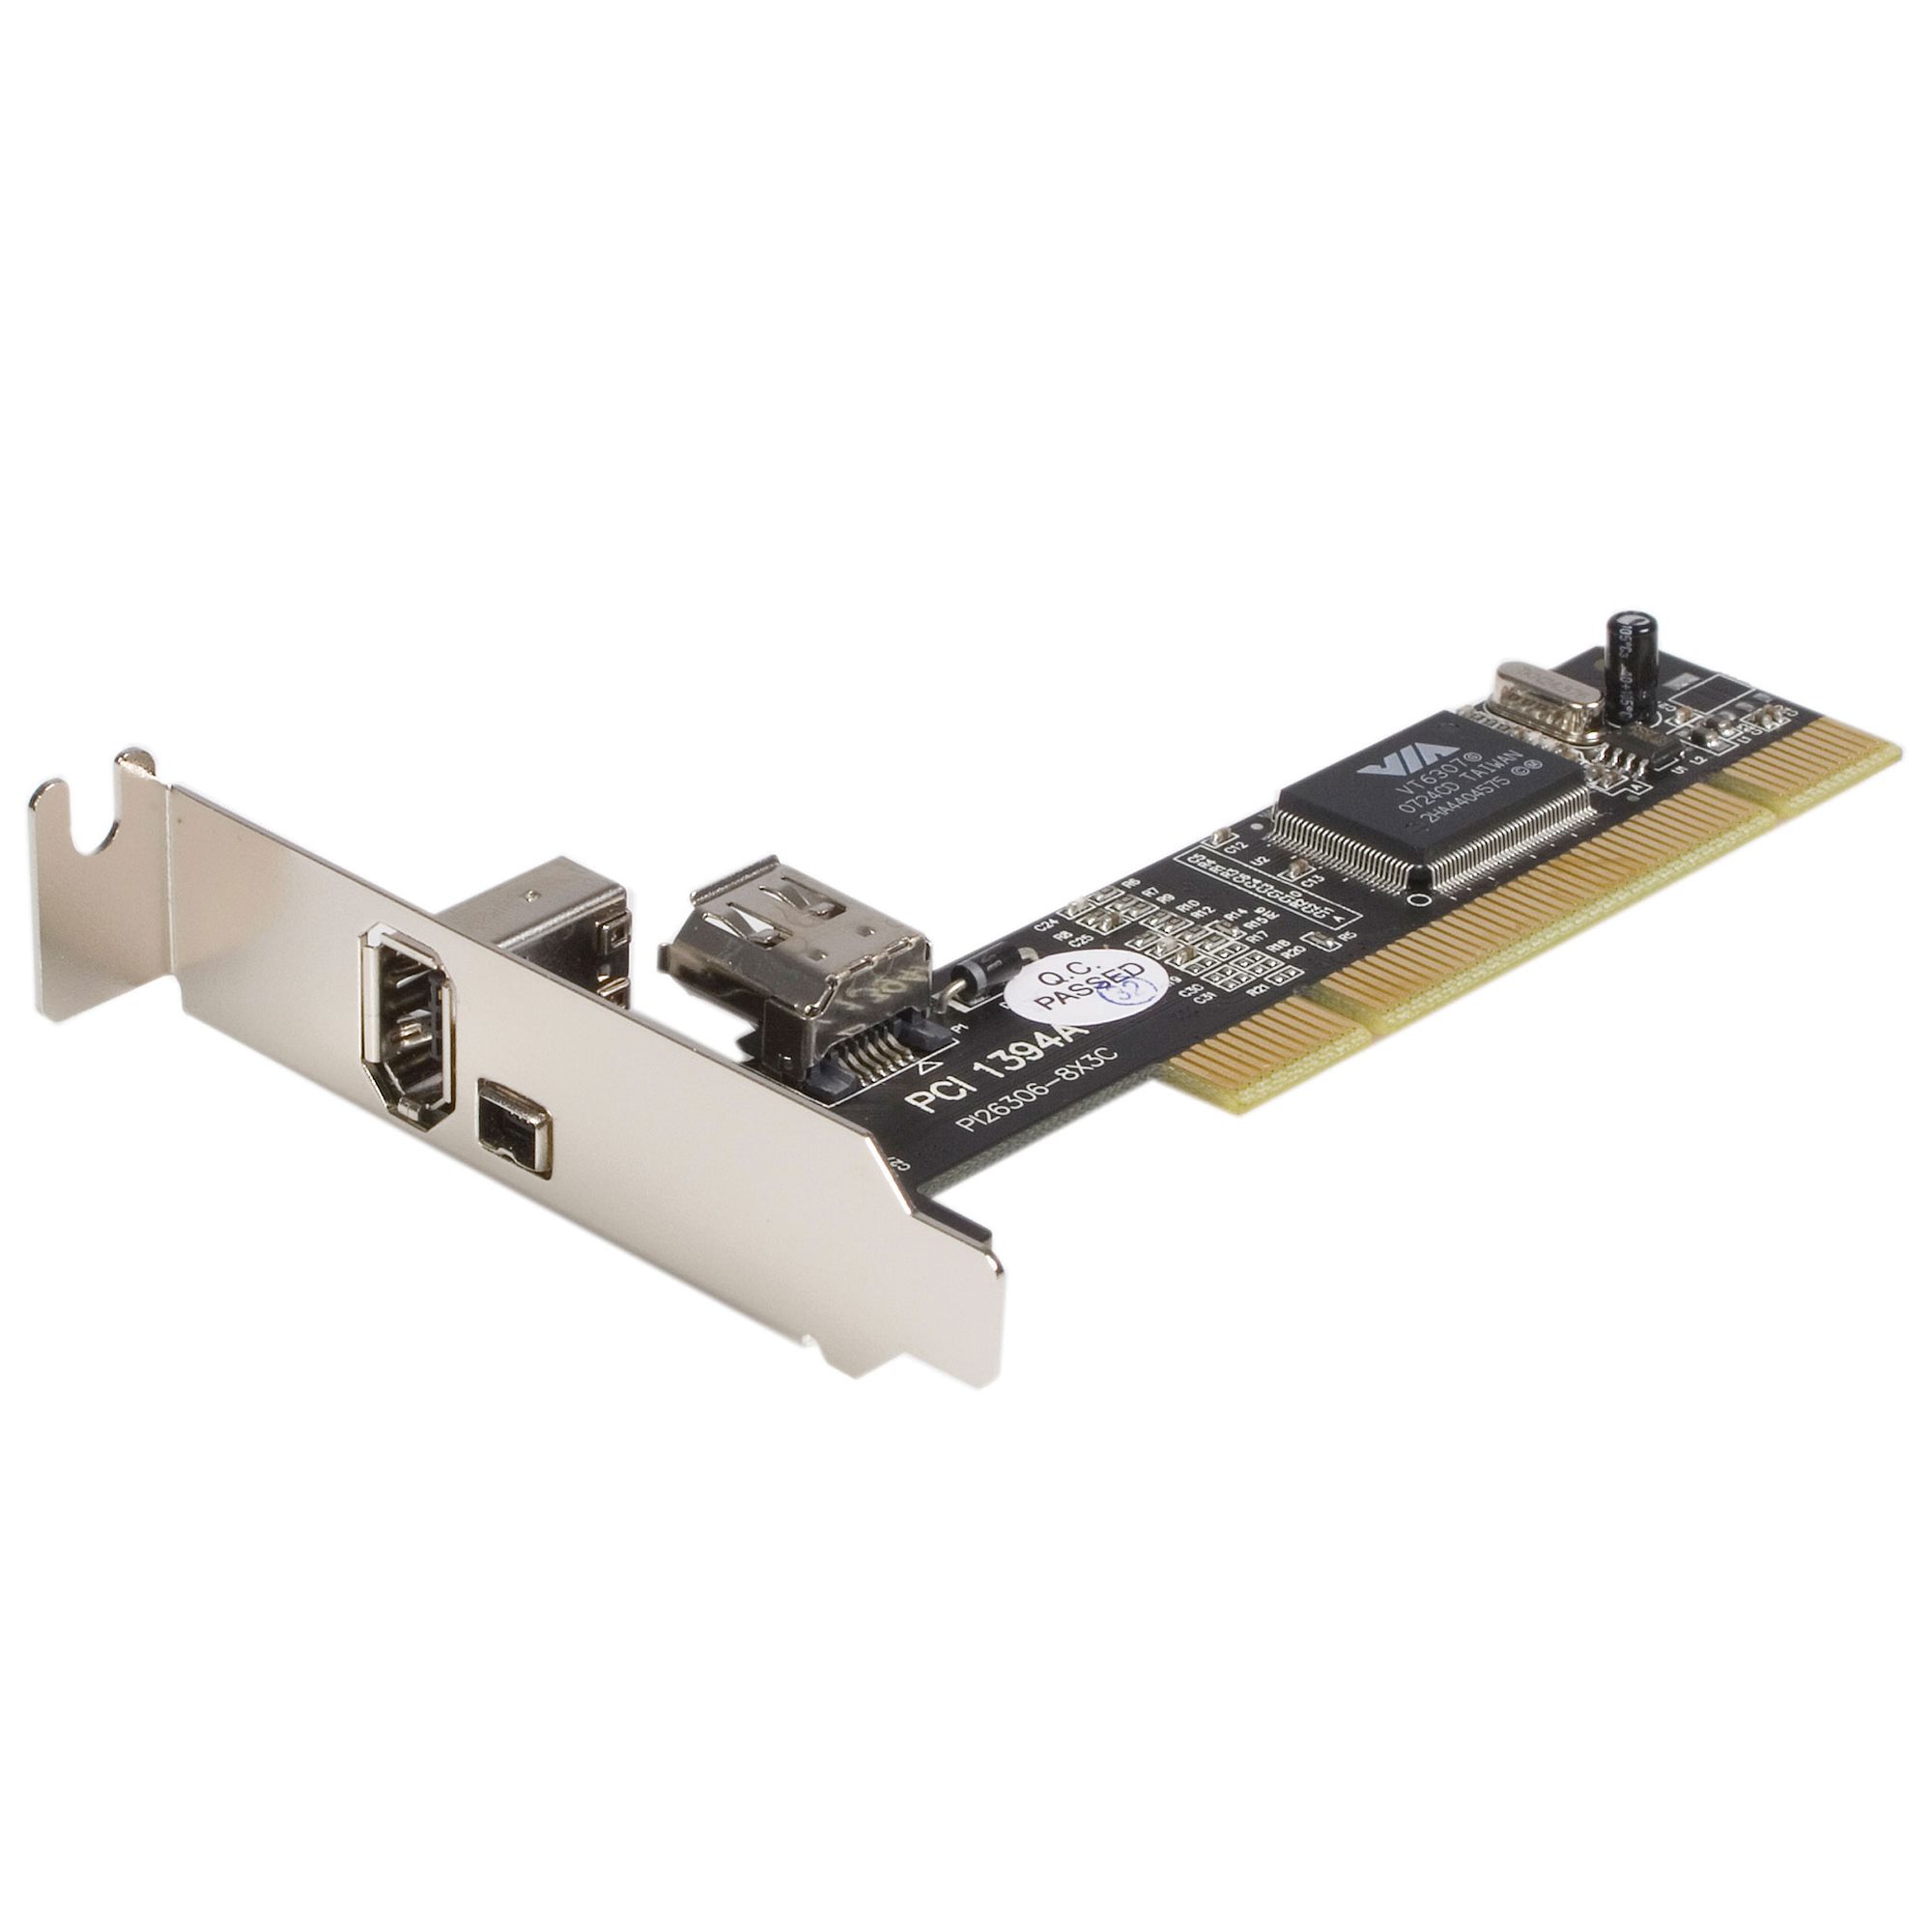 PCIe to 3 Ports 1394 B A card External Firewire 800 400 IEEE 1394 PCI  express card For HD video capture card